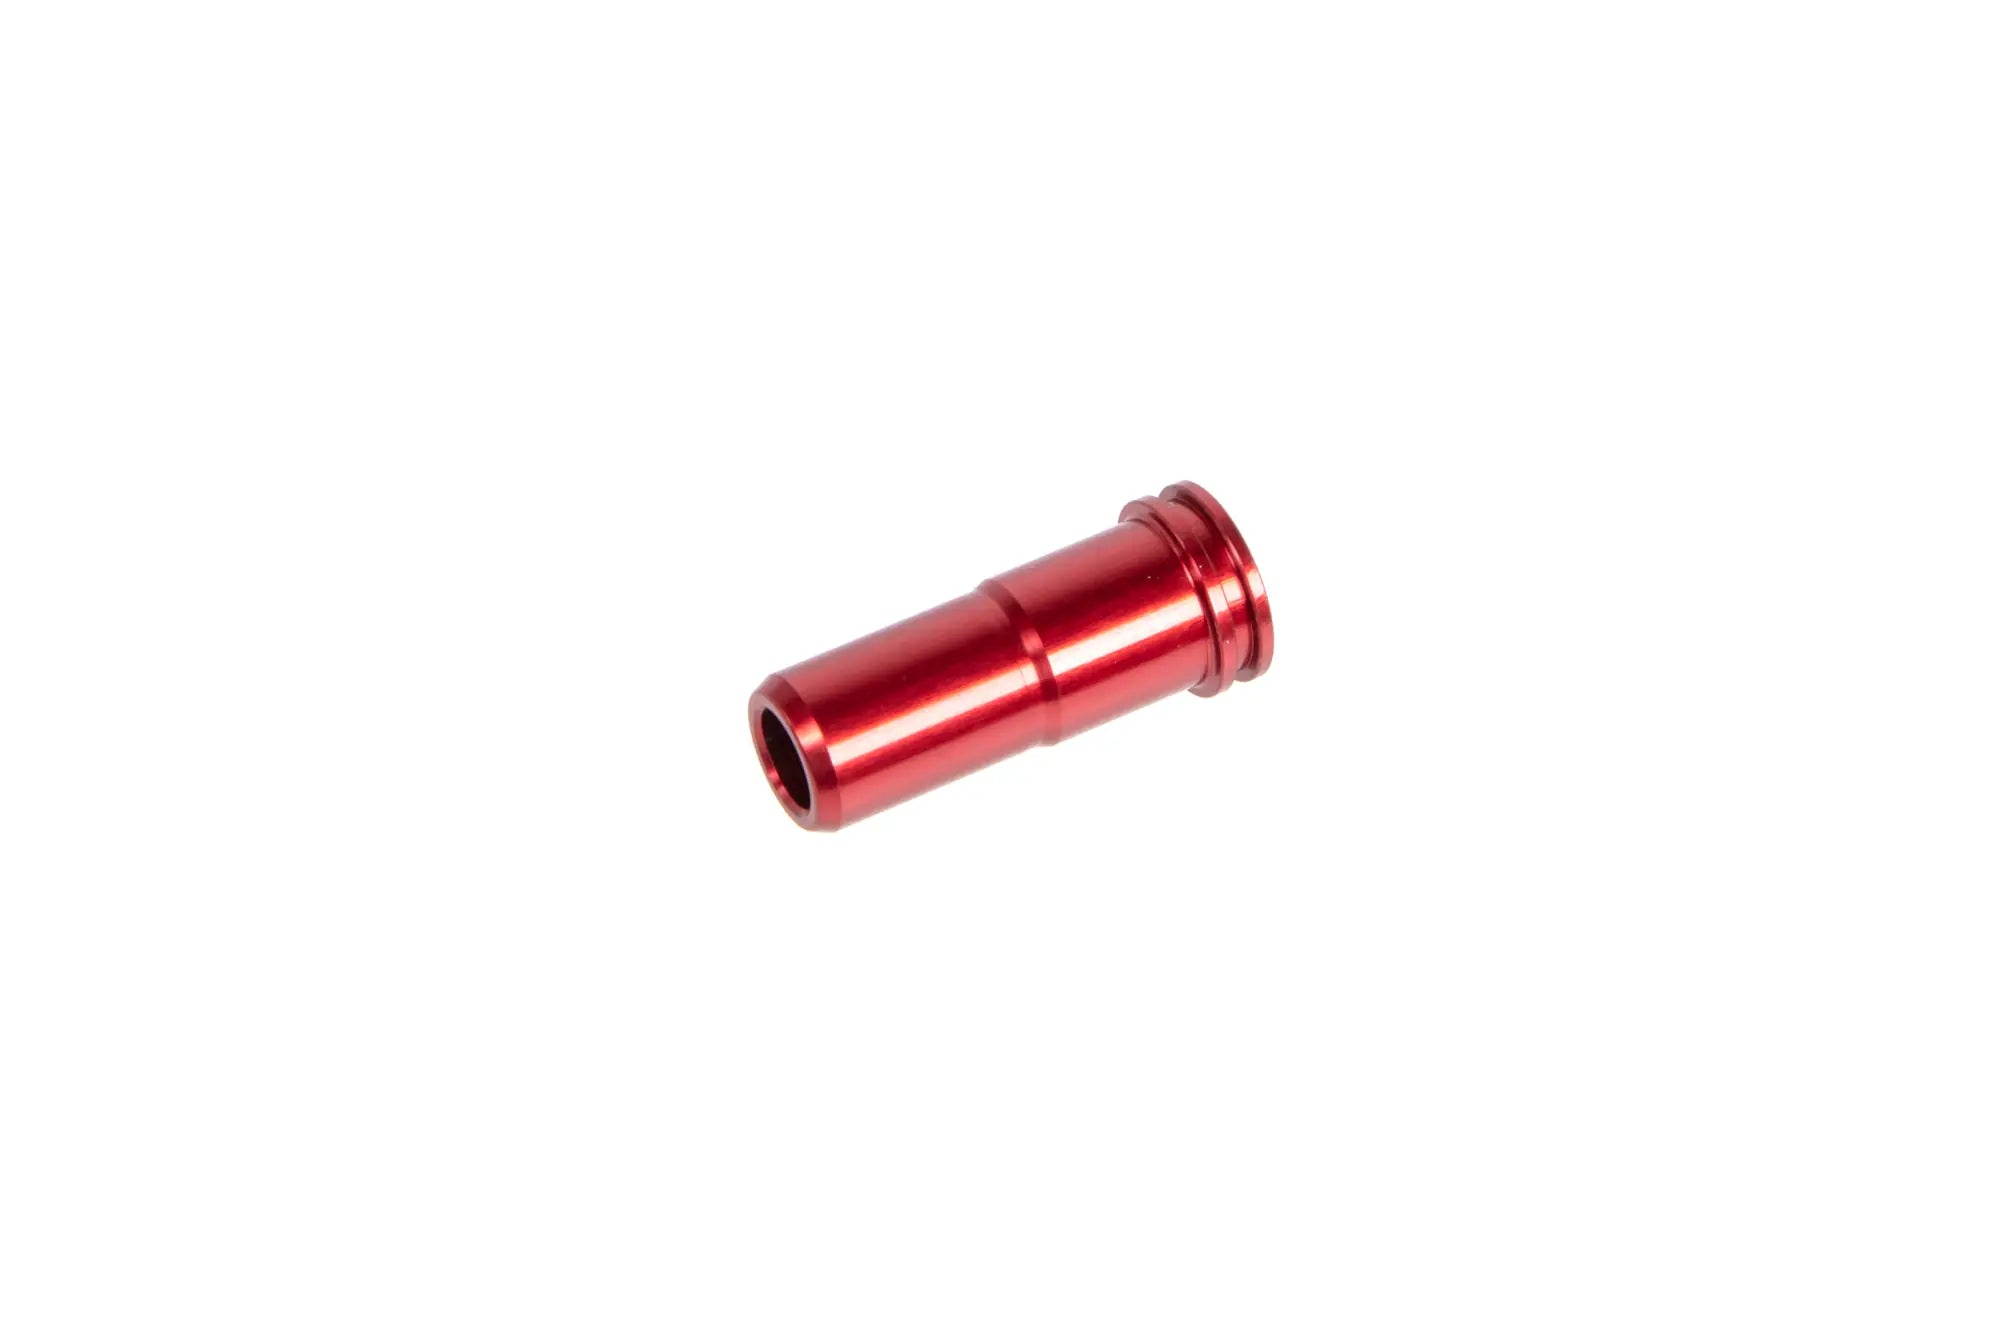 Sealed ERGAL nozzle for M4/AR-15 replicas 21.10mm Red